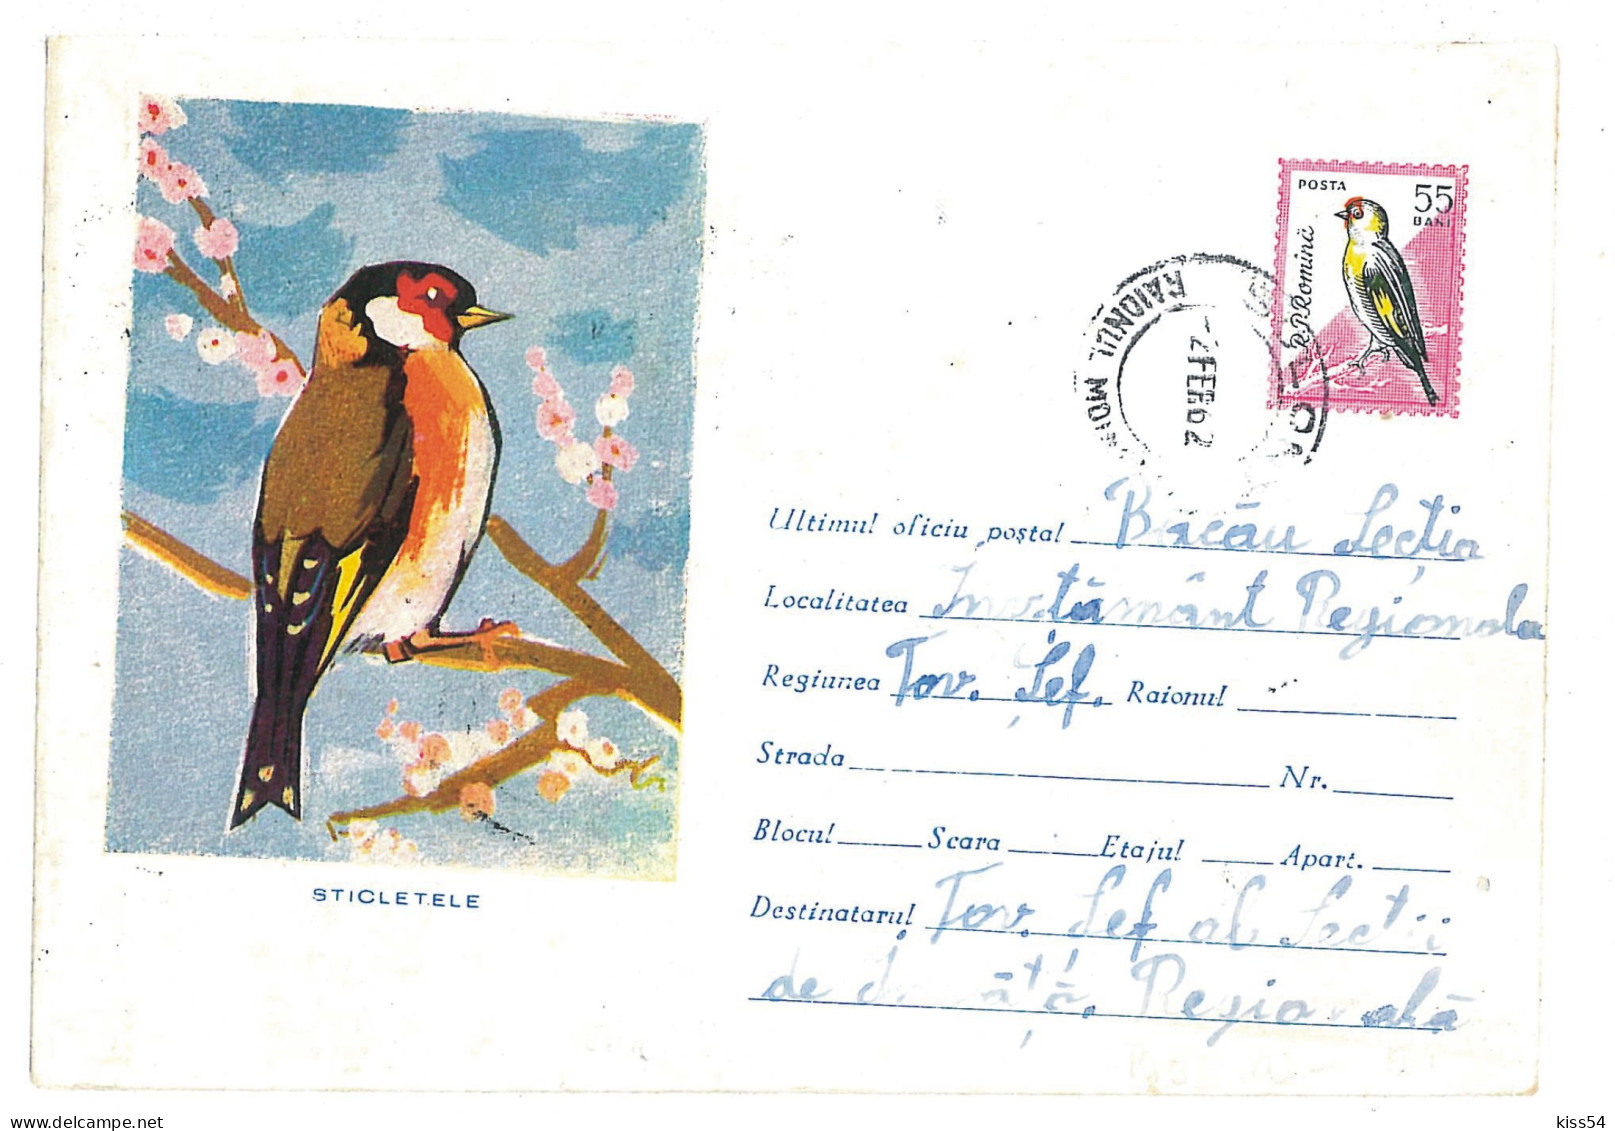 IP 61 - 0411zc Bird, GOLDFINCH, Romania - Stationery ( Little Fixed Stamp ) - Used - 1961 - Postal Stationery